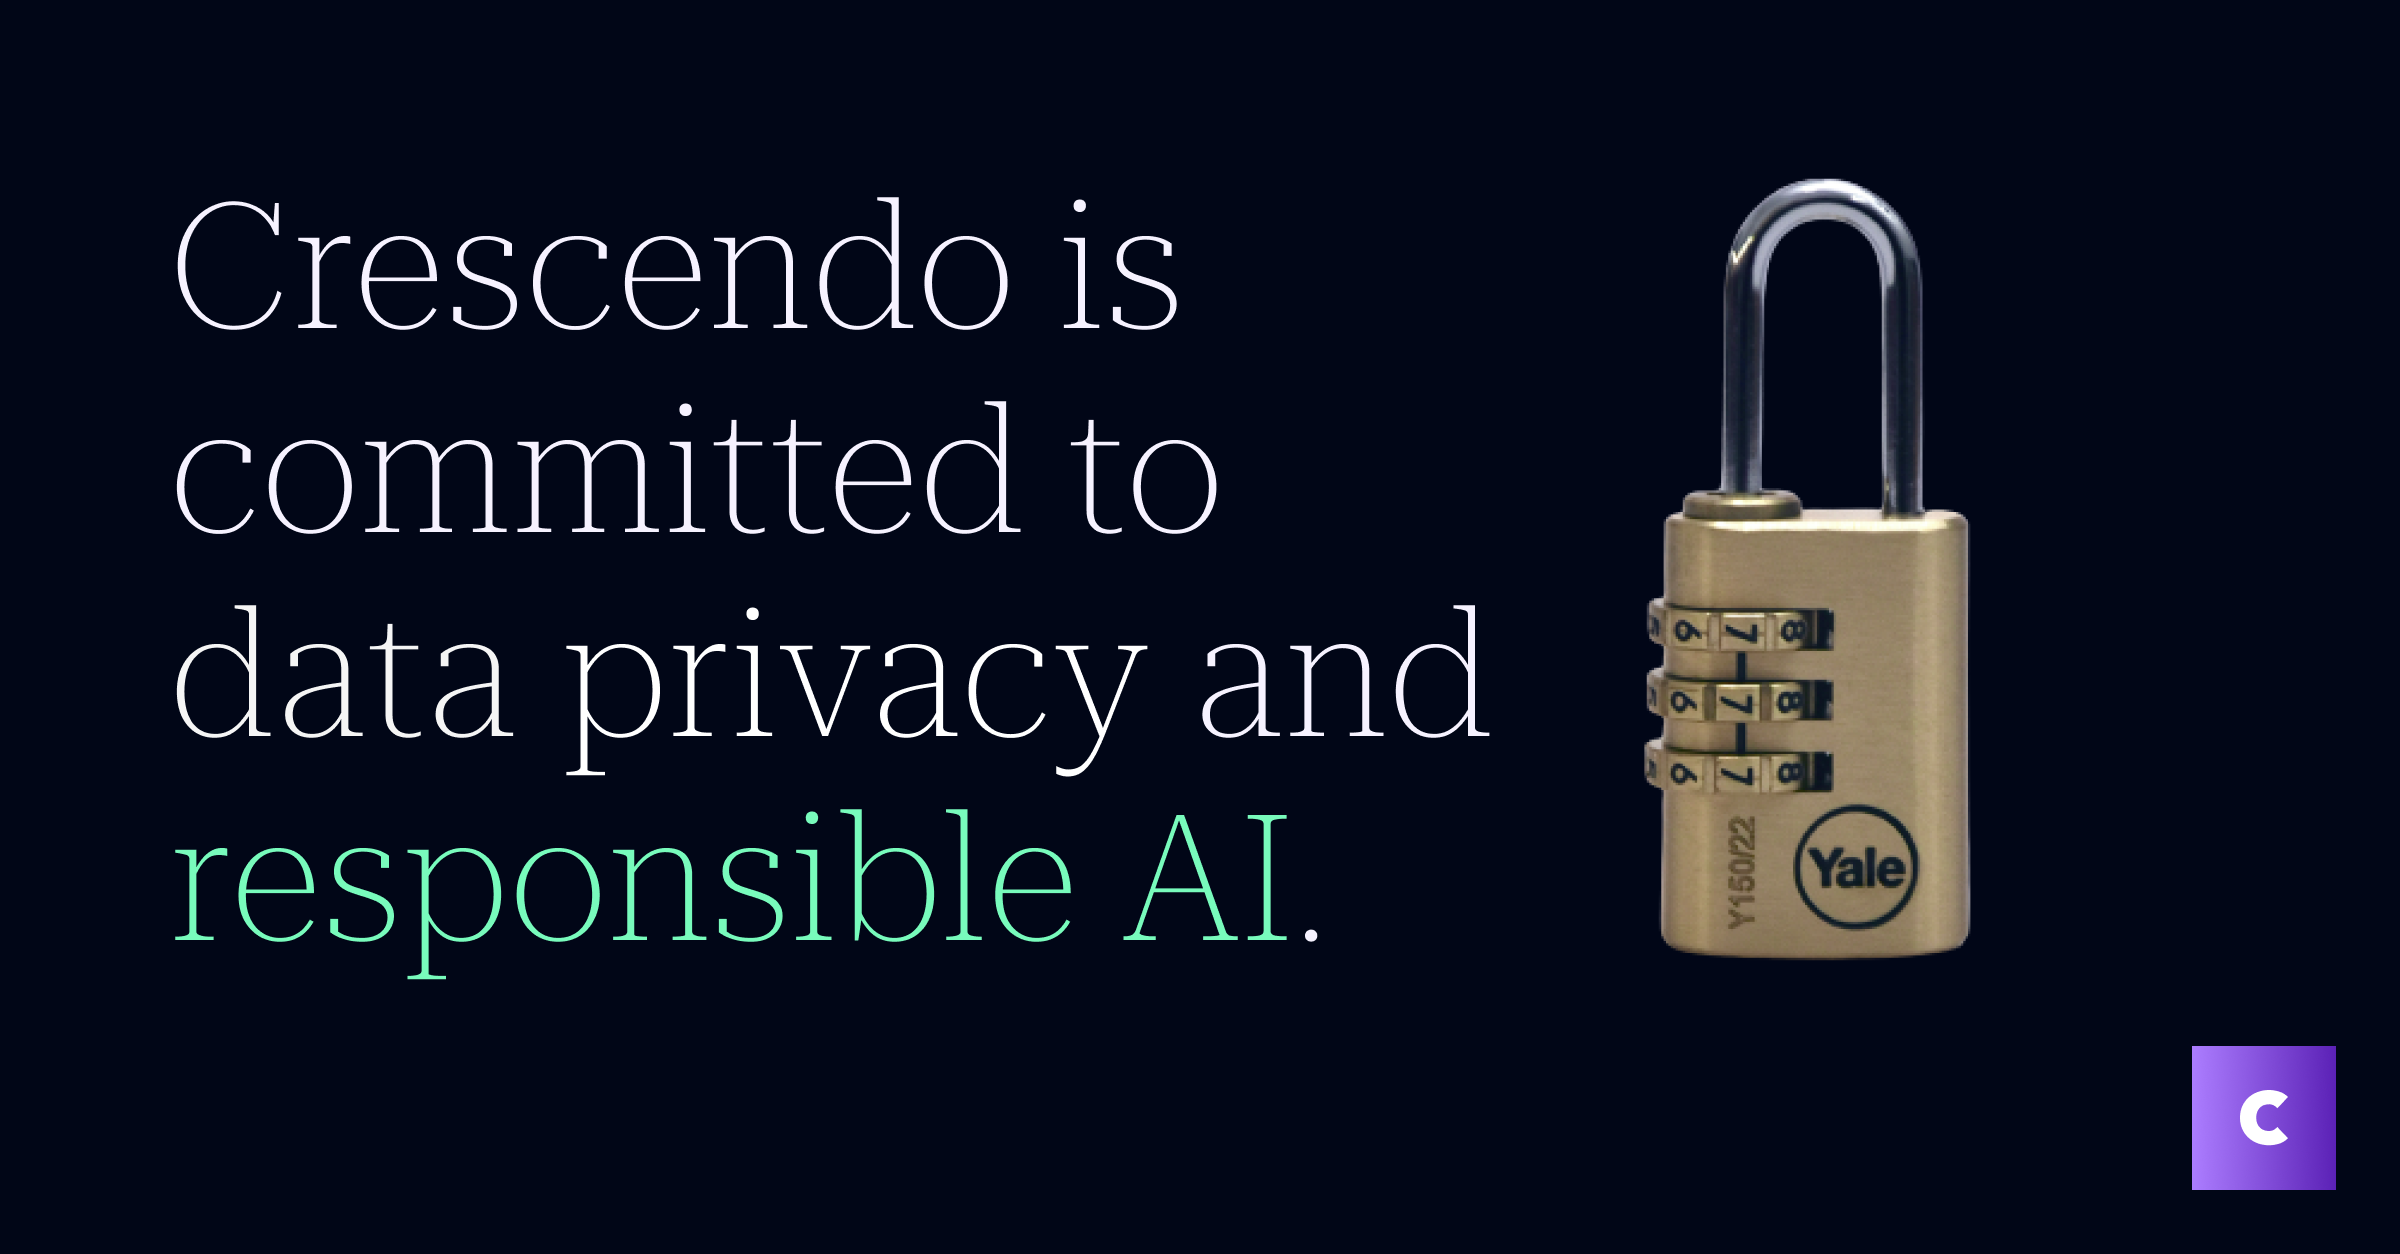 Crescendo is committed to responsible AI